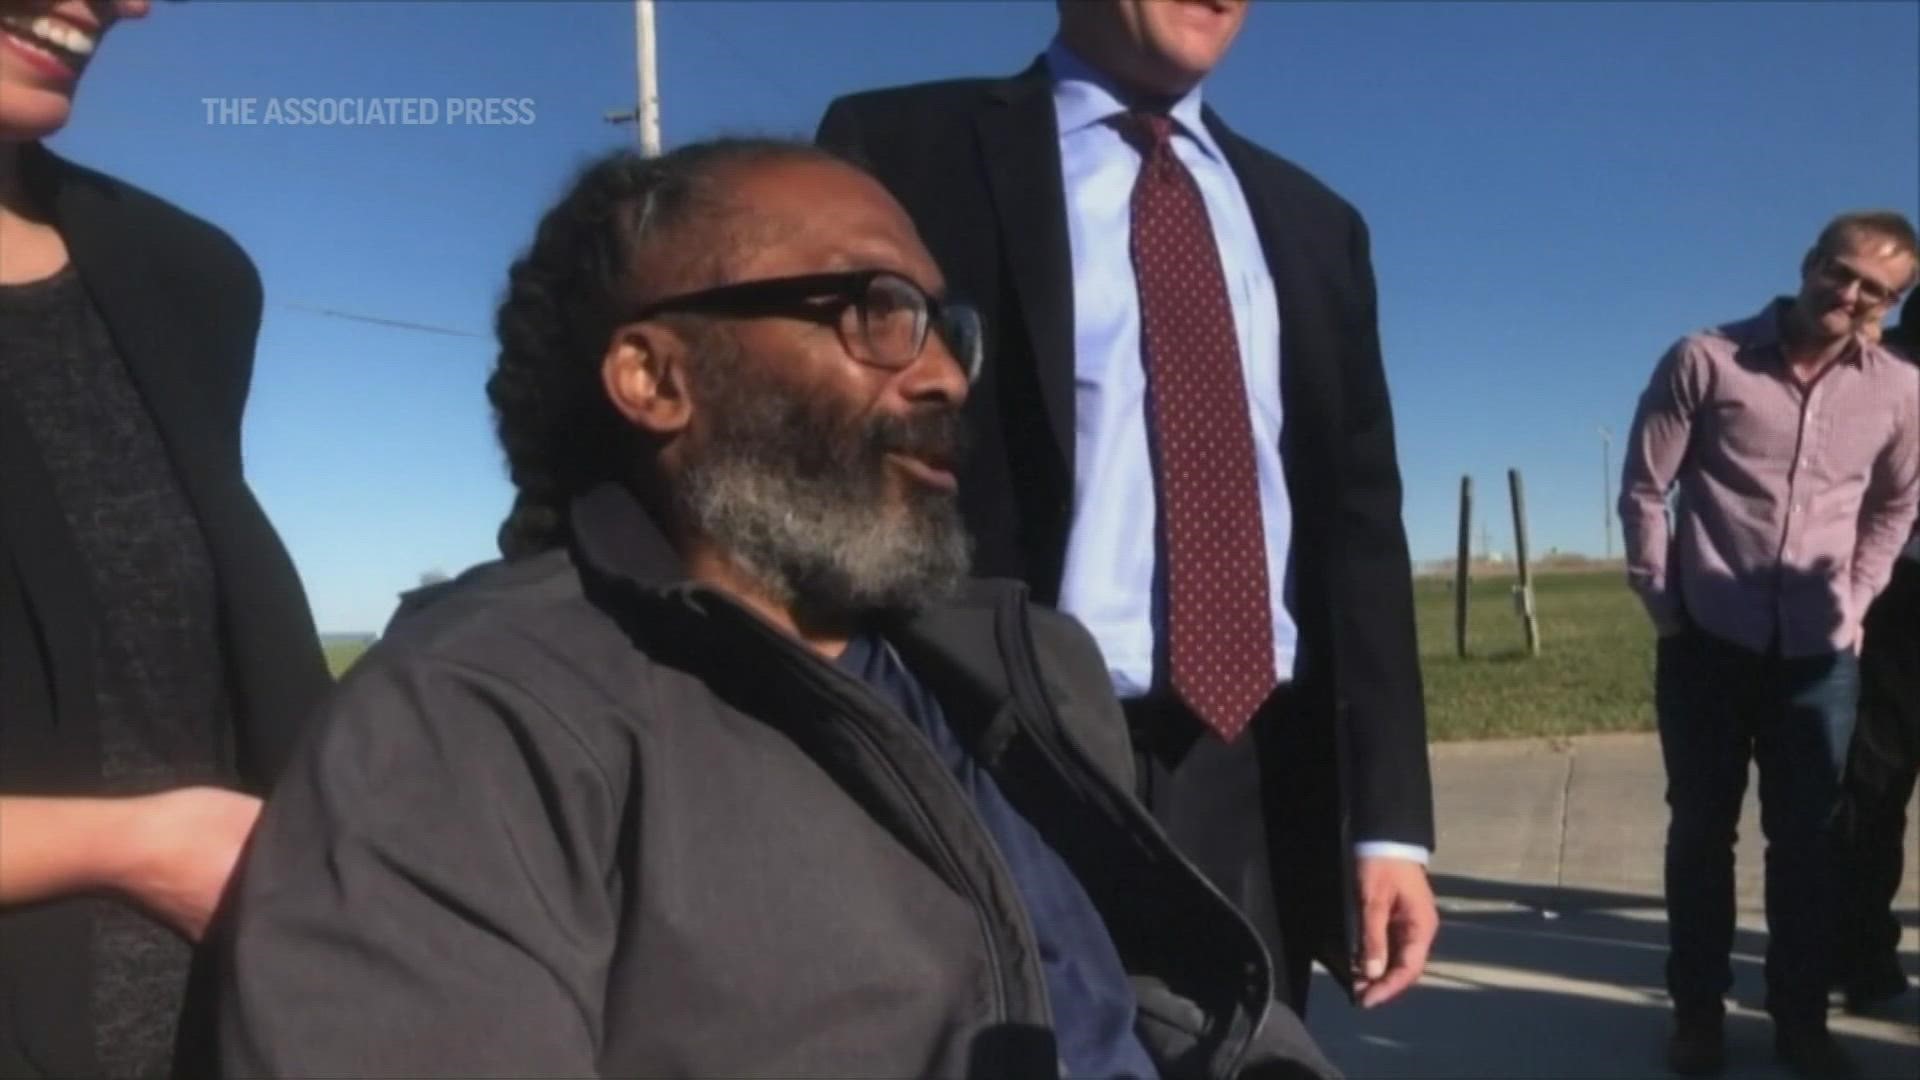 Kevin Strickland walks free for the first time since 1979. He was imprisoned at age 18 and released at age 62, nearly 43 years of his life spent behind bars.